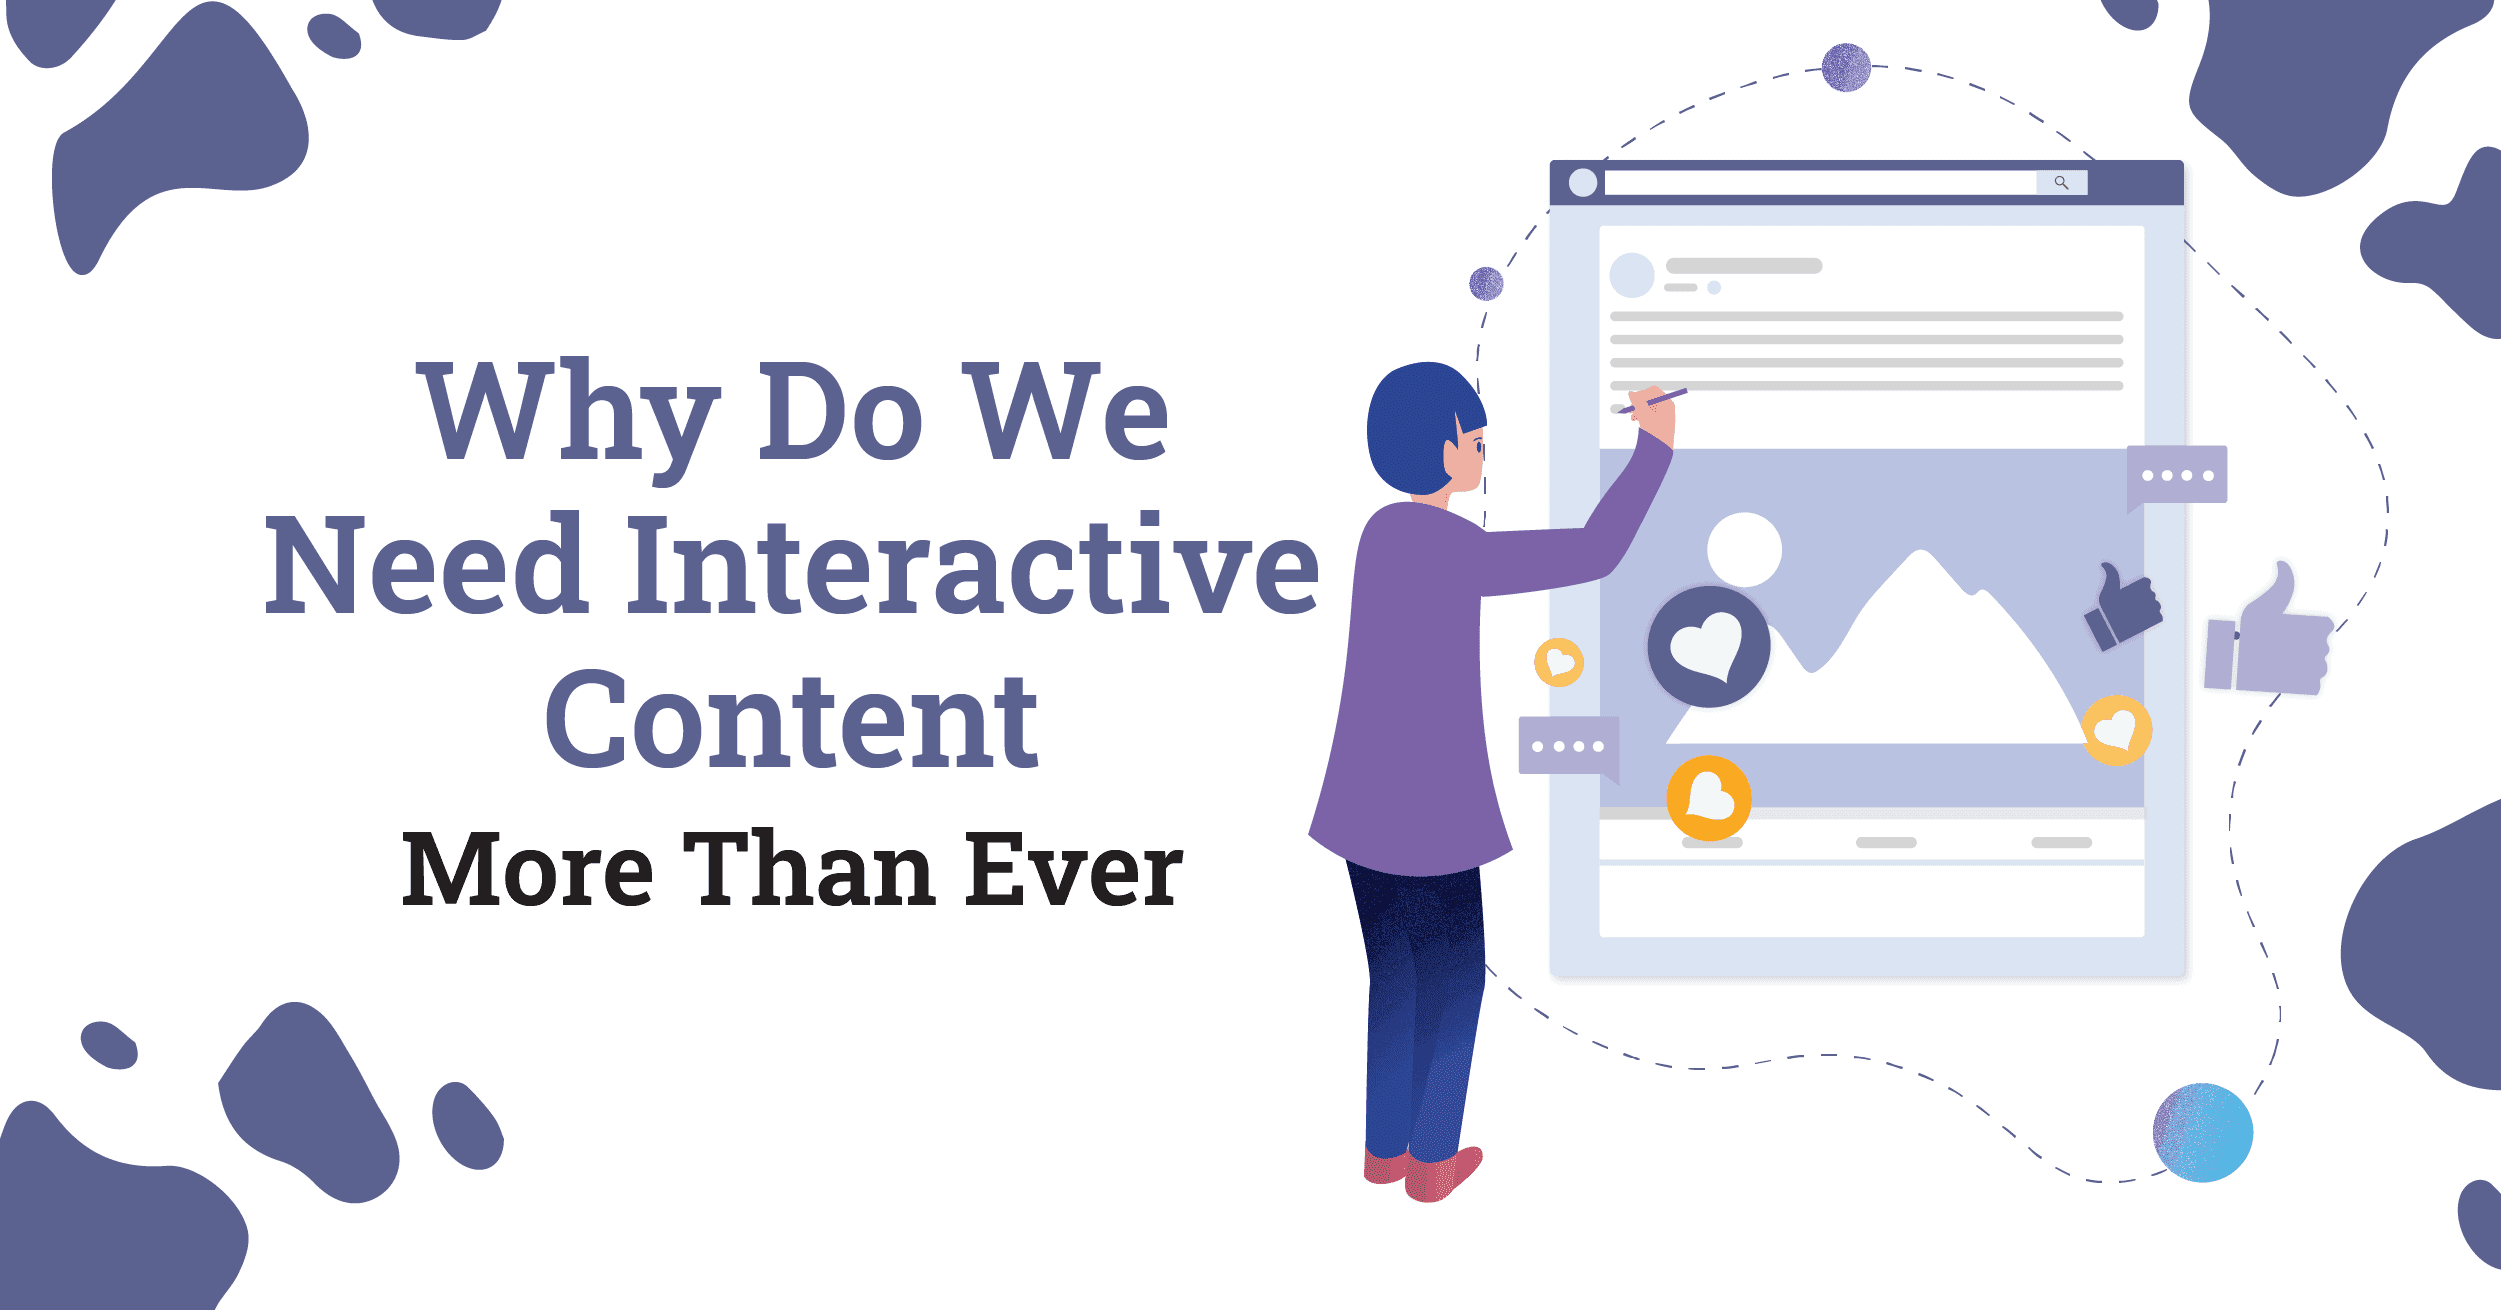 Why Do We Need Interactive Content More Than Ever